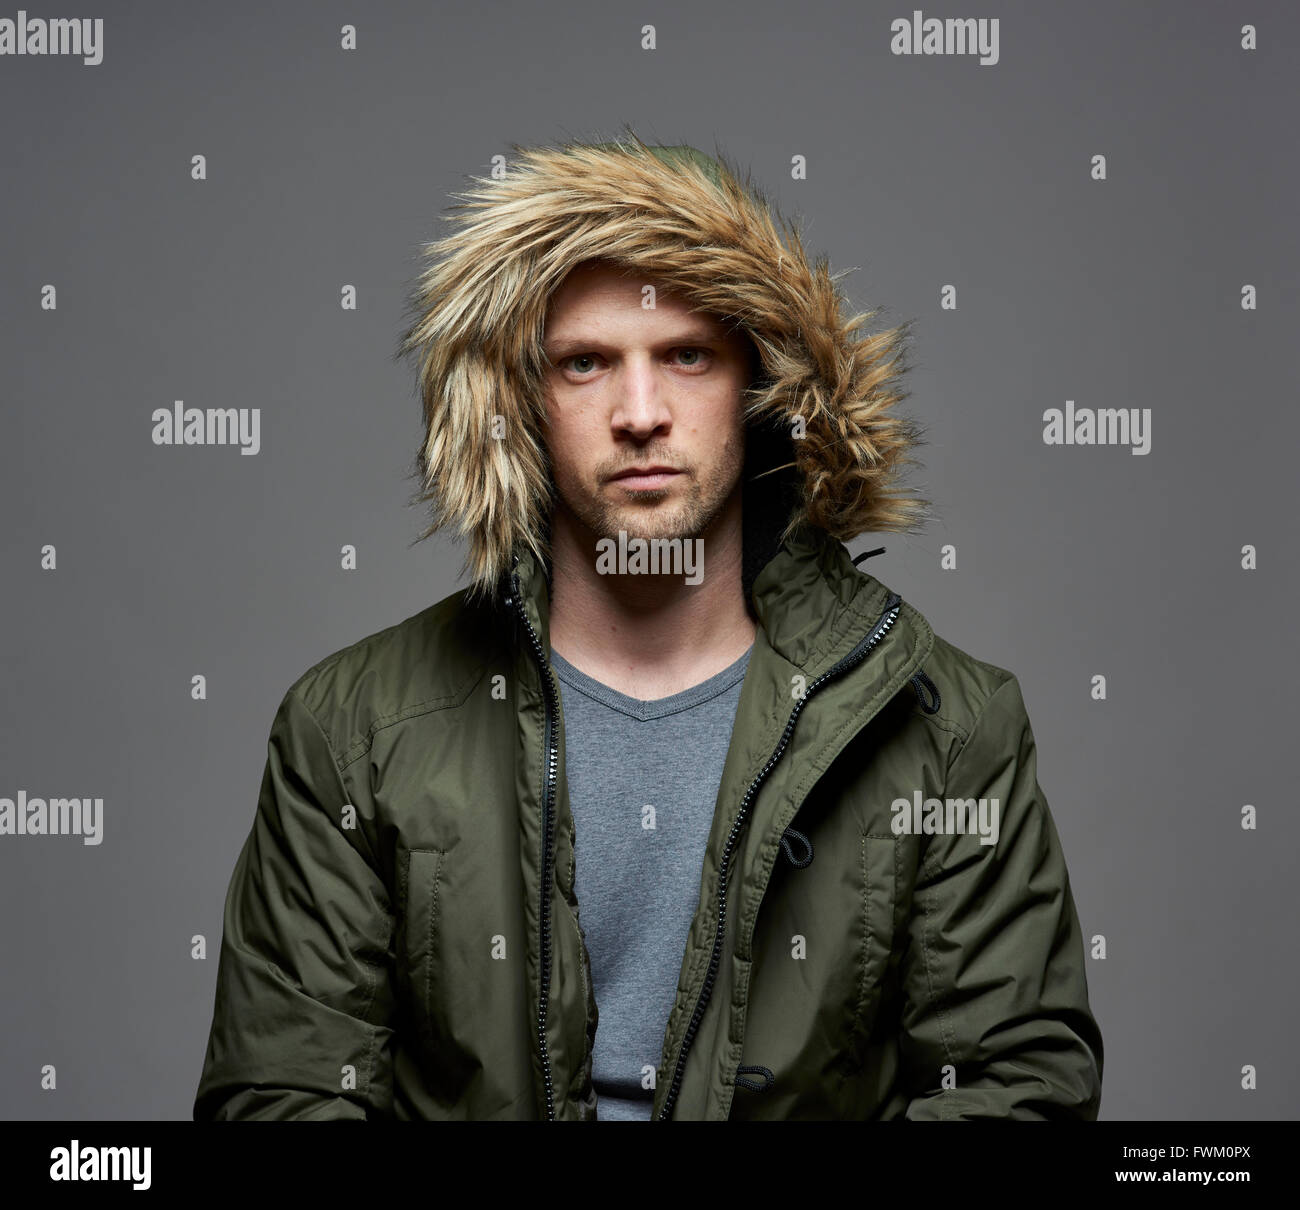 Studio portrait of young adult caucasian model wearing winter coat with hood on. Isolated on gray background. Stock Photo